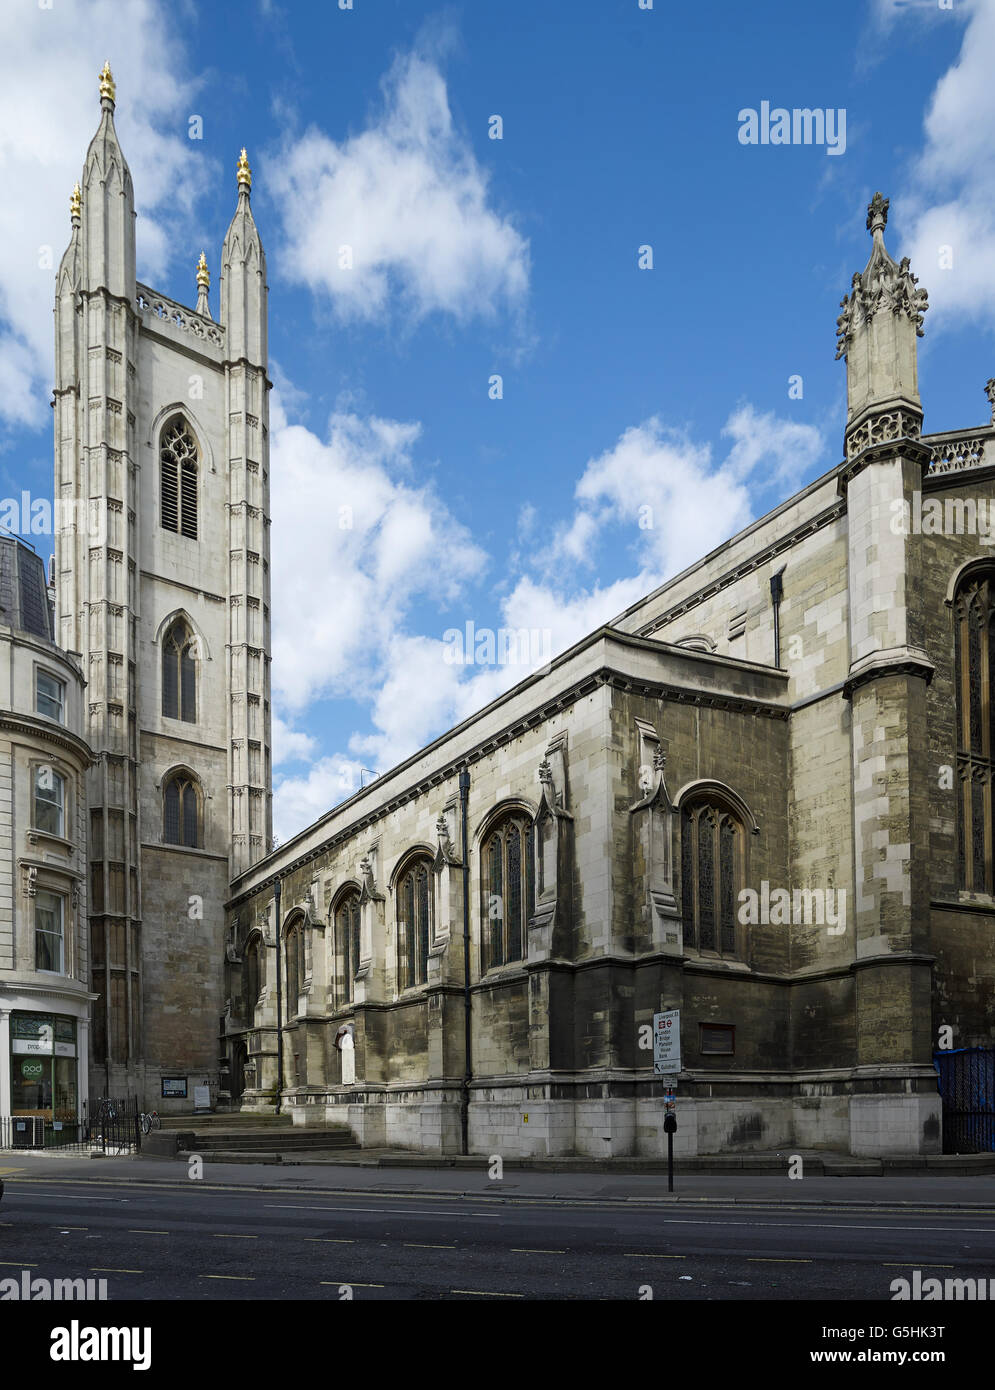 St Mary Aldermary, church in the City of London, exterior Stock Photo